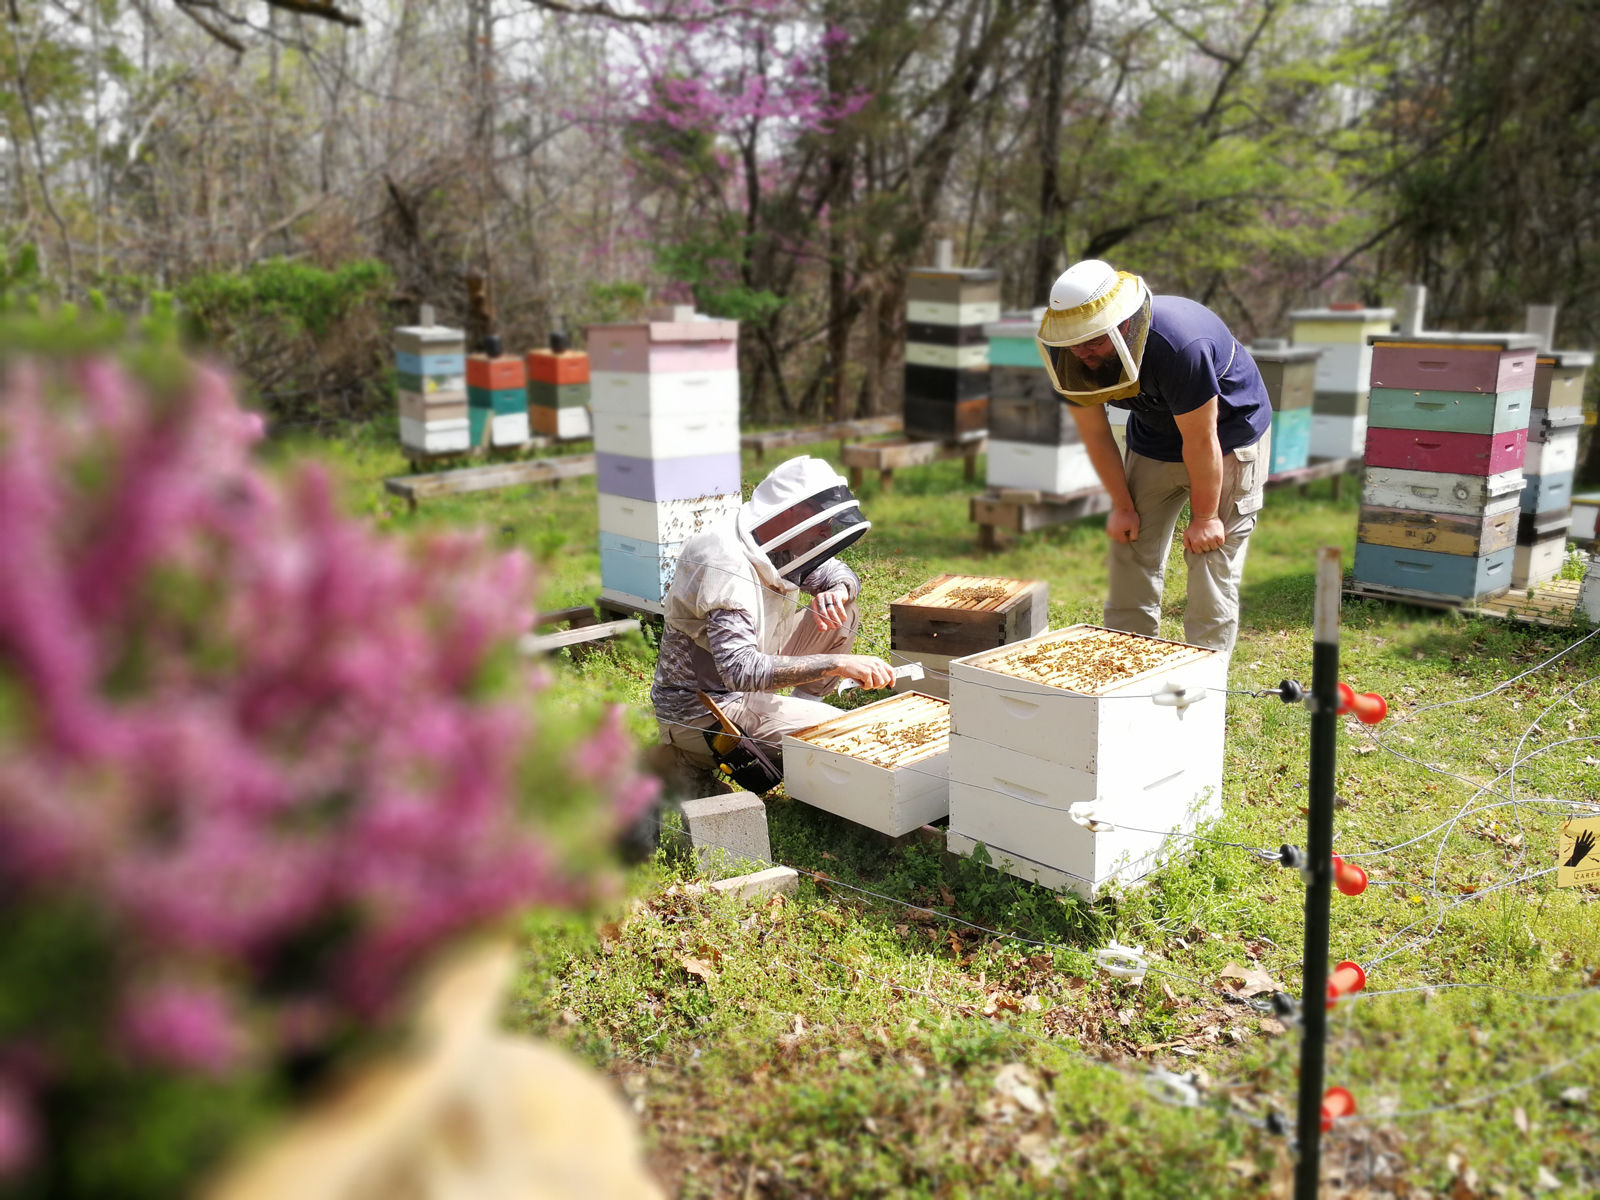 Lynn White, with Richland Honey Bees, a member of the Russian Honeybee Breeders Association, will be at some MOM’s locations over the weekend to answer questions about the BeeSA program. (Courtesy Richland Honey Bees)